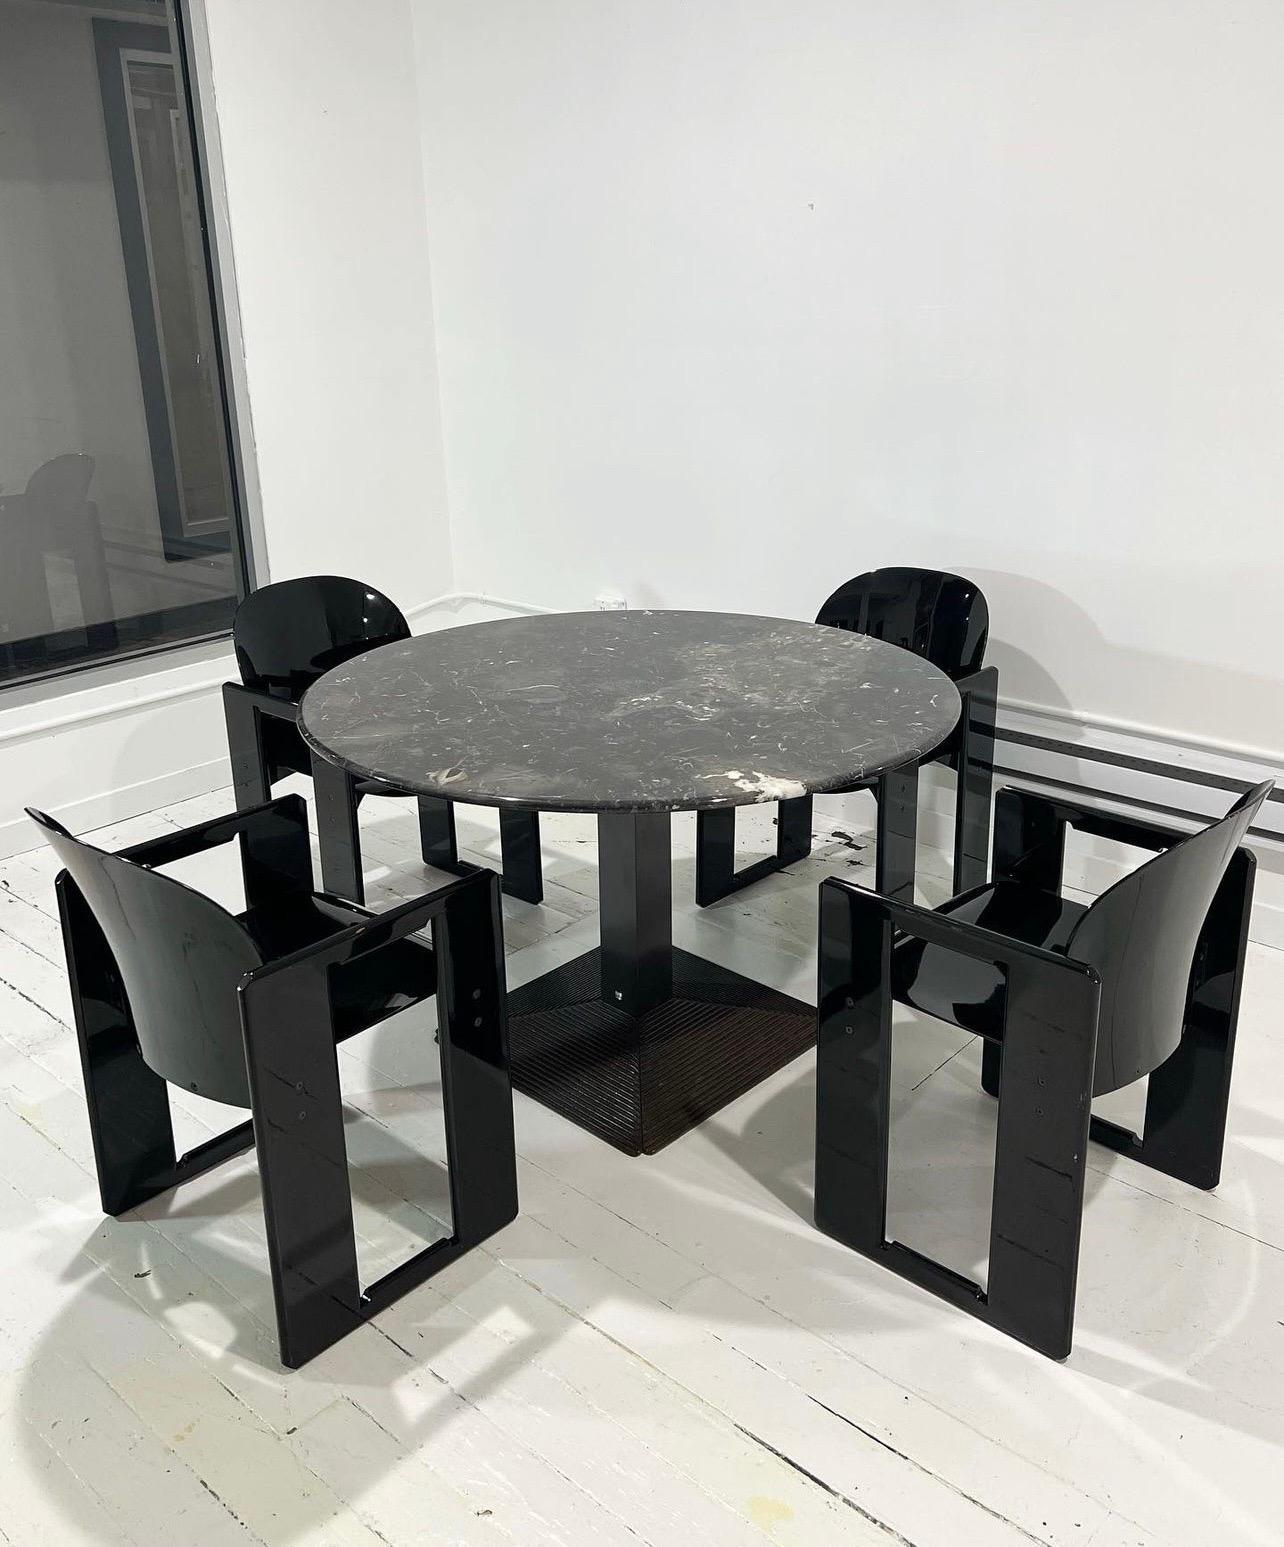 Stunning vintage marble round dining table by B&B Italia.

An incredibly rare dining table by B&B Italia. Features a round marble top and steel base. Beautifully designed and in fantastic condition! Table and chairs are sold separately. Check out